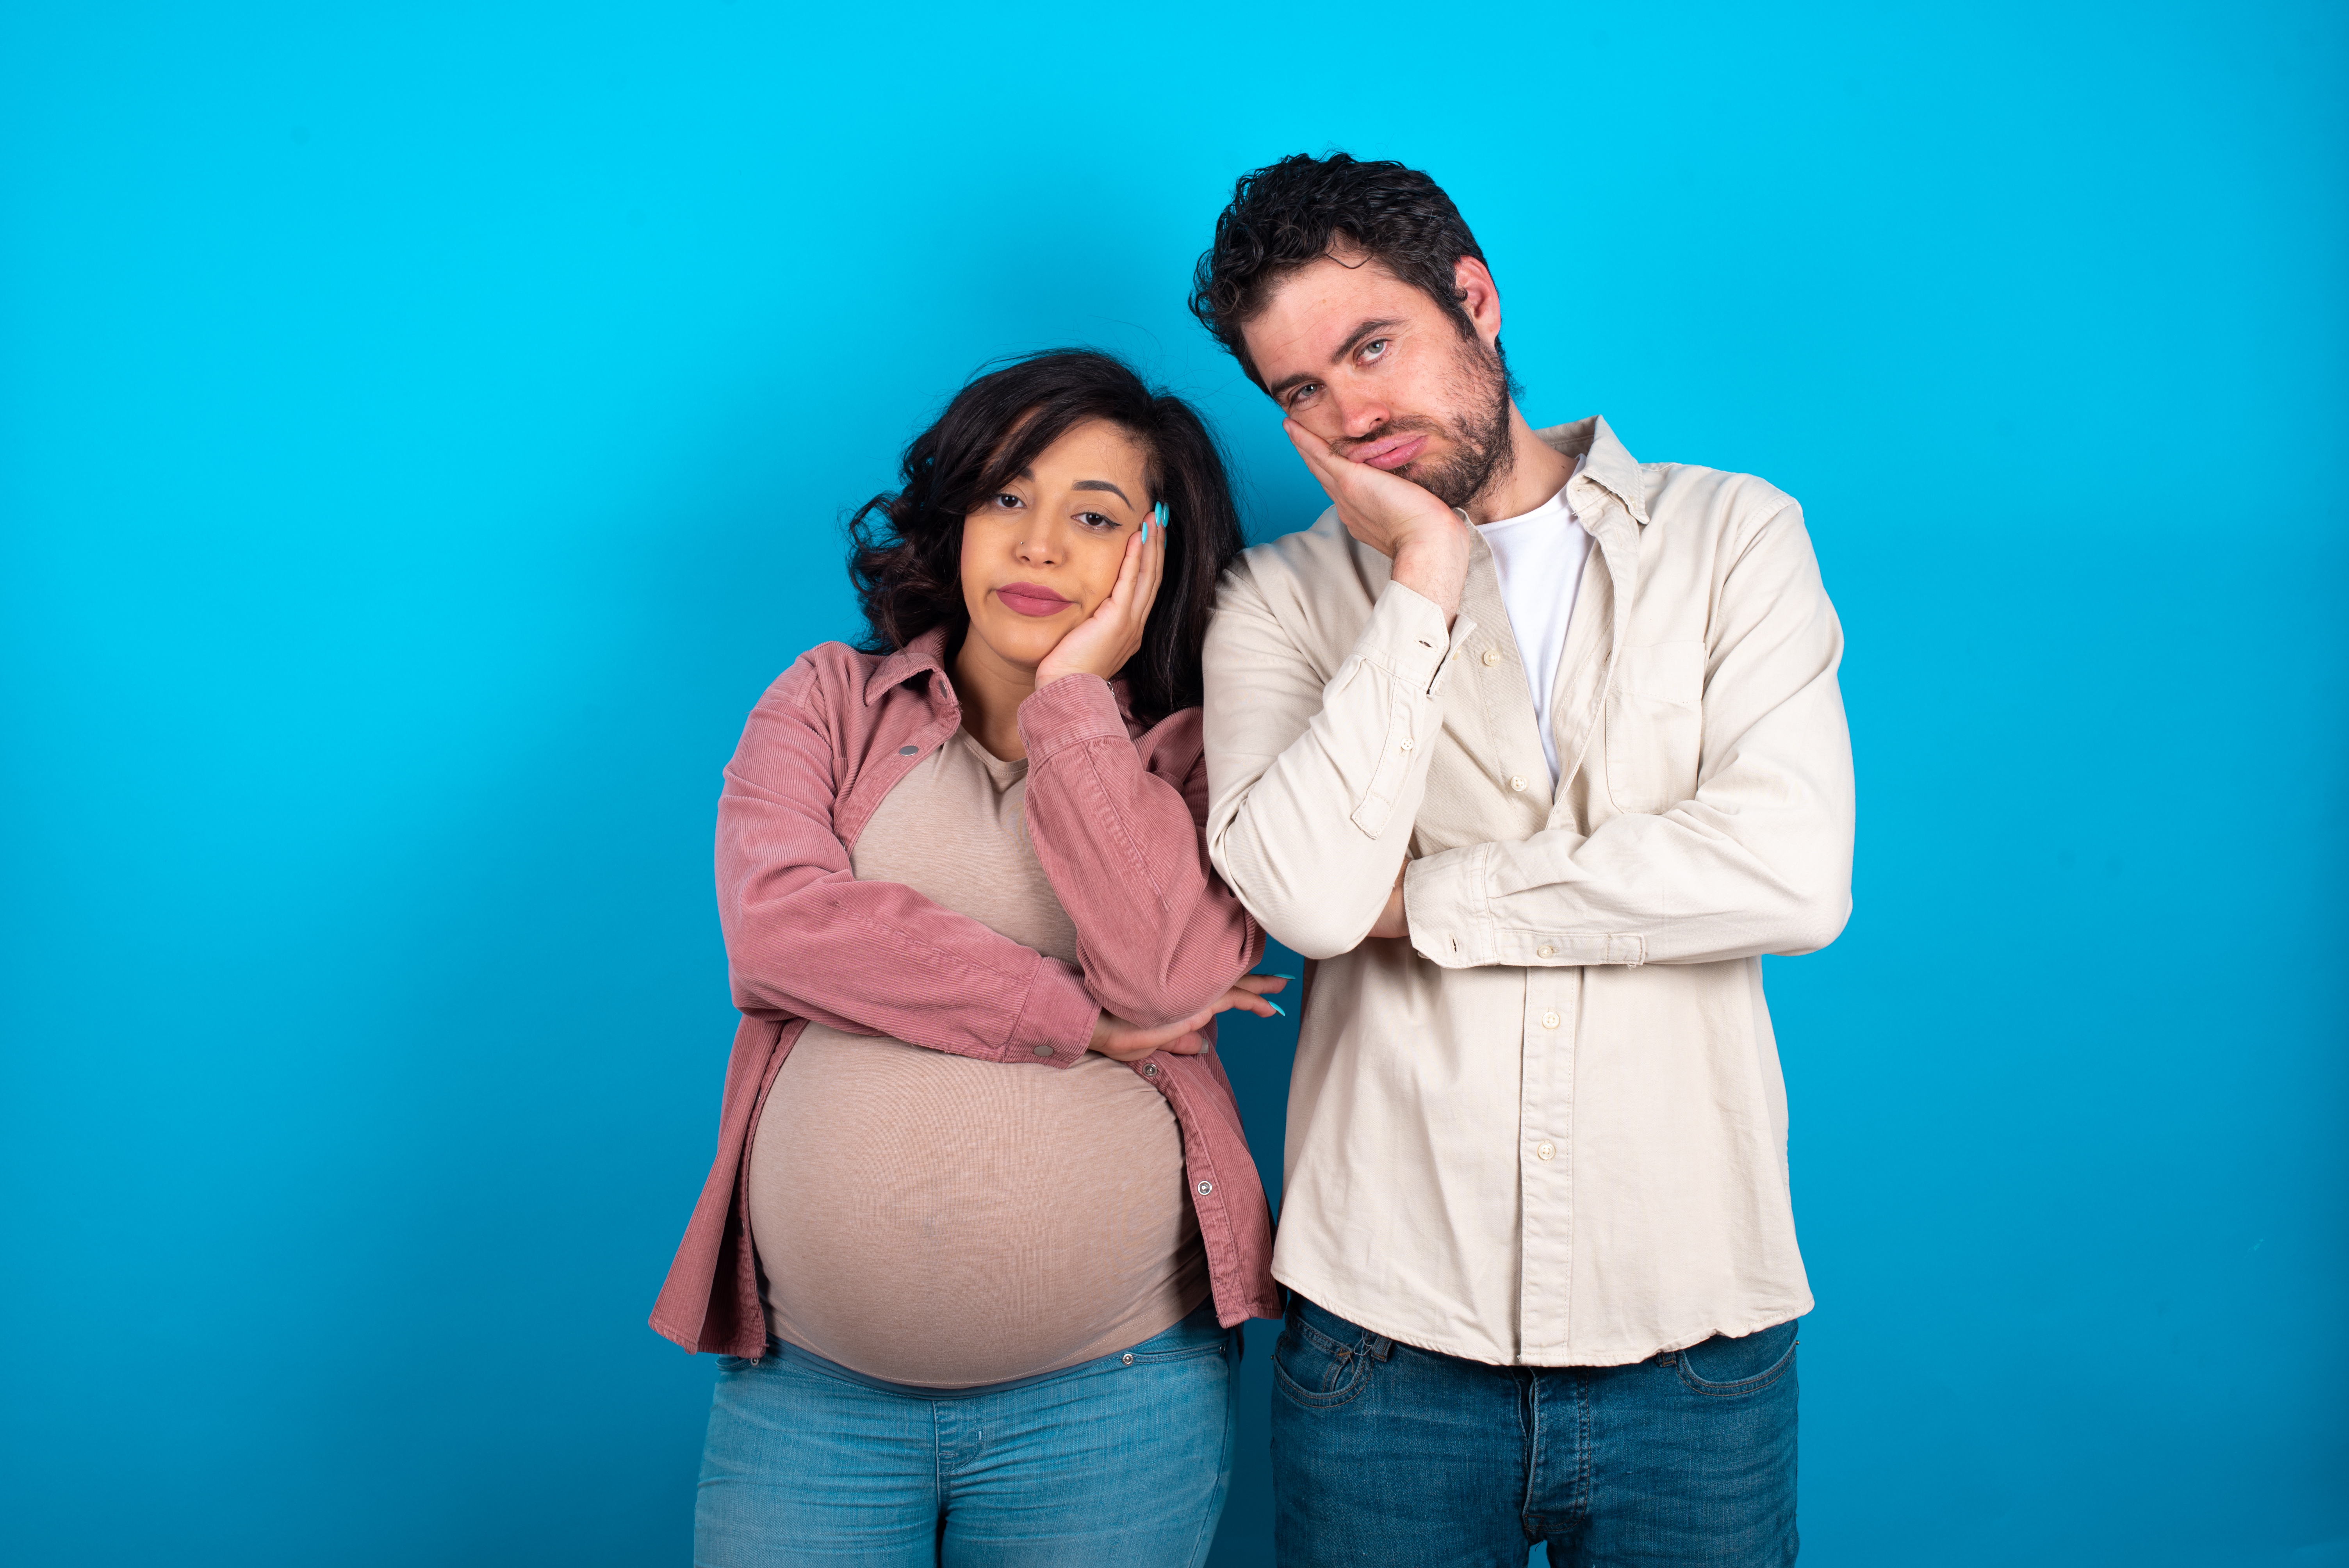 A young couple expecting a baby looks bored | Source: Shutterstock